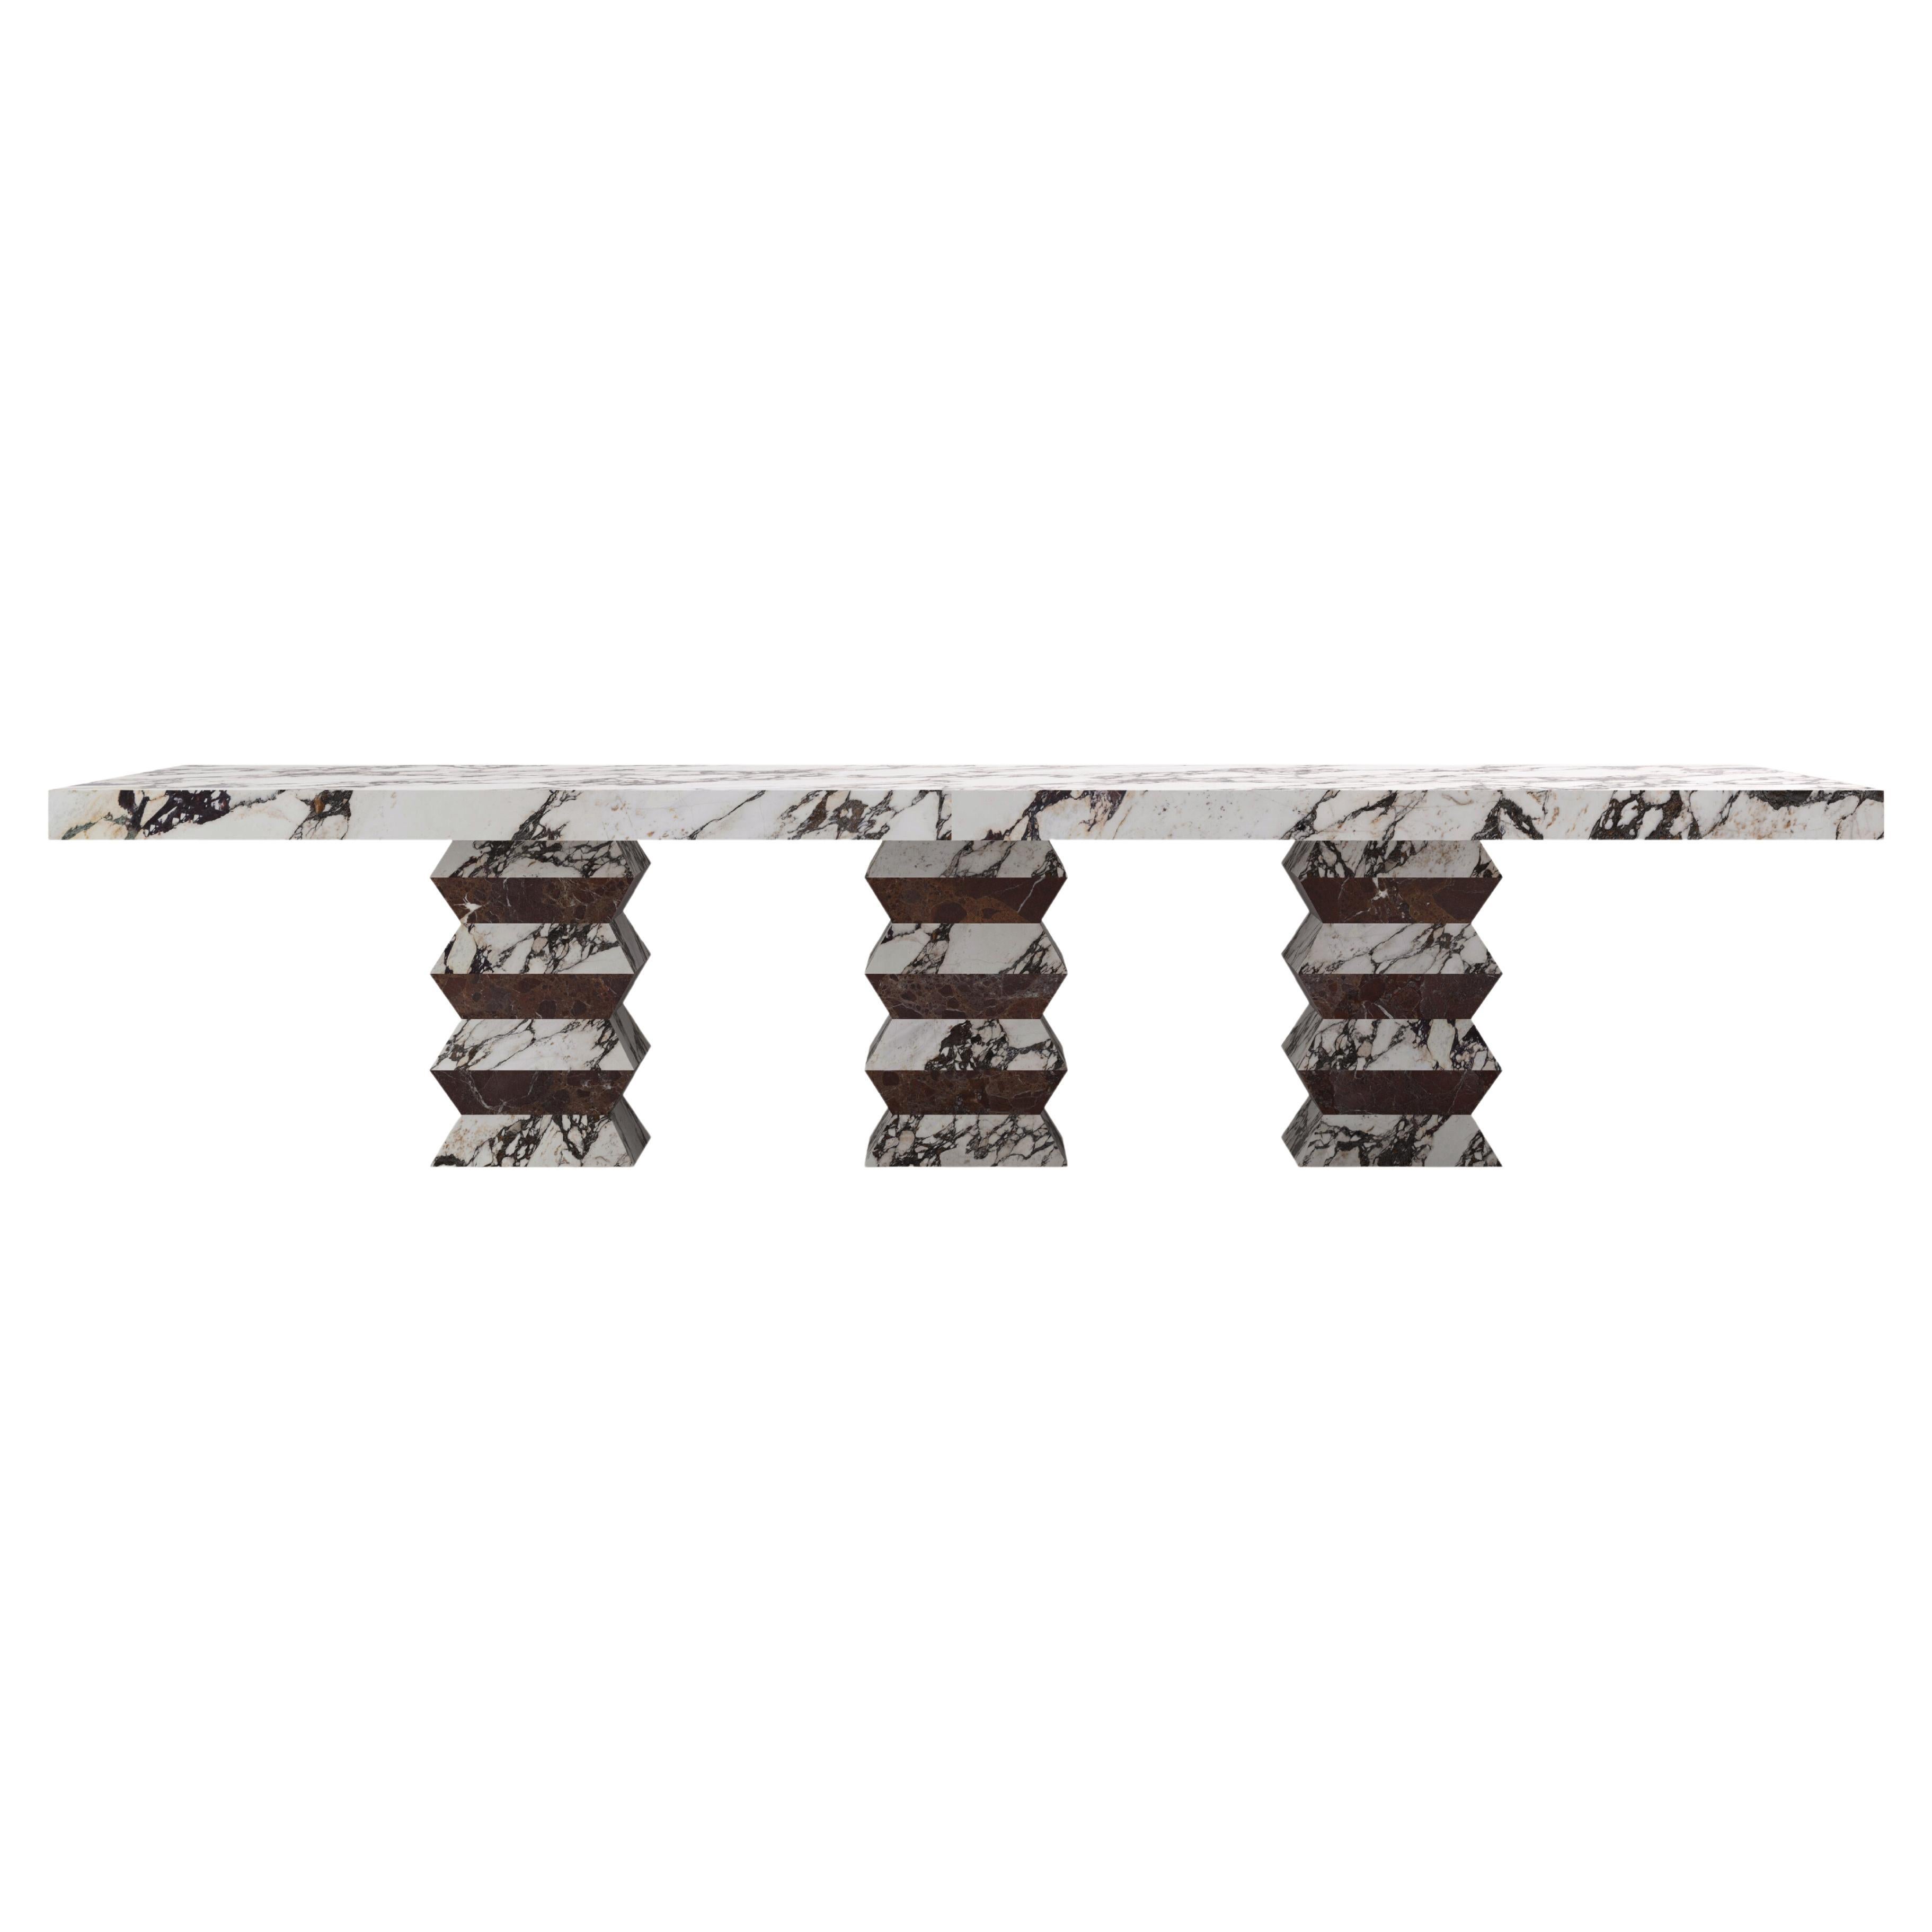 FORM(LA) Grinza Rectangle Dining Table 144"L x 48"W x 32" Calacatta Viola Marble For Sale